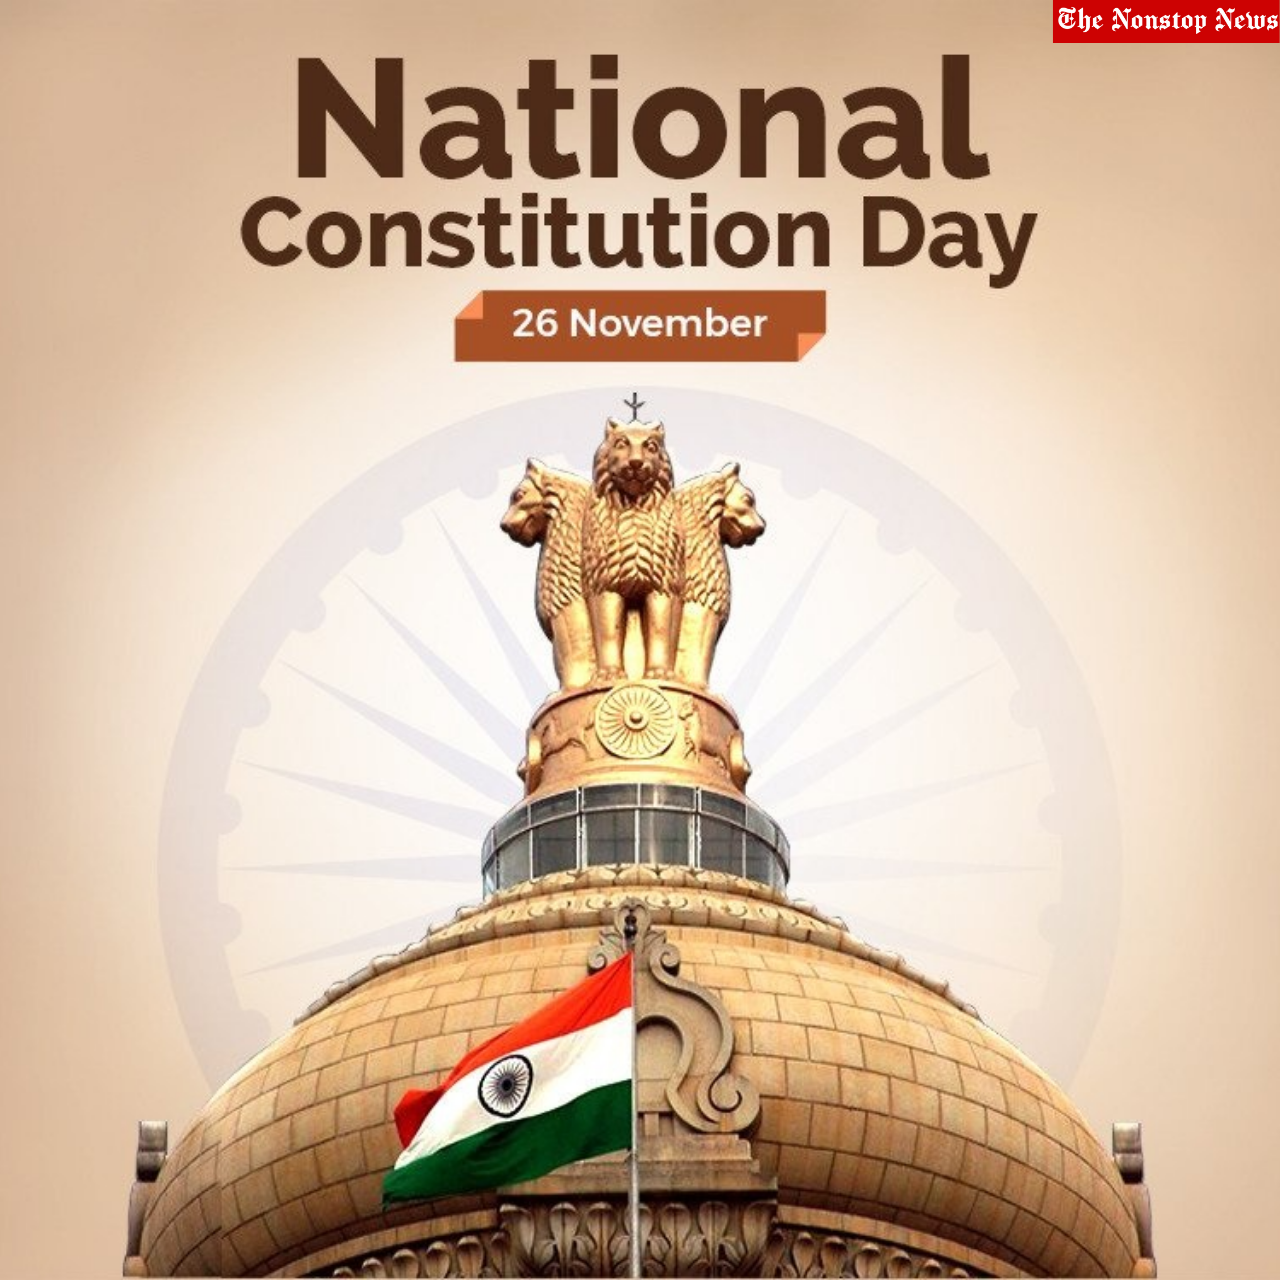 Constitution Day 2021 Quotes, Poster, Slogans, HD Images, Messages, and Wishes to Share